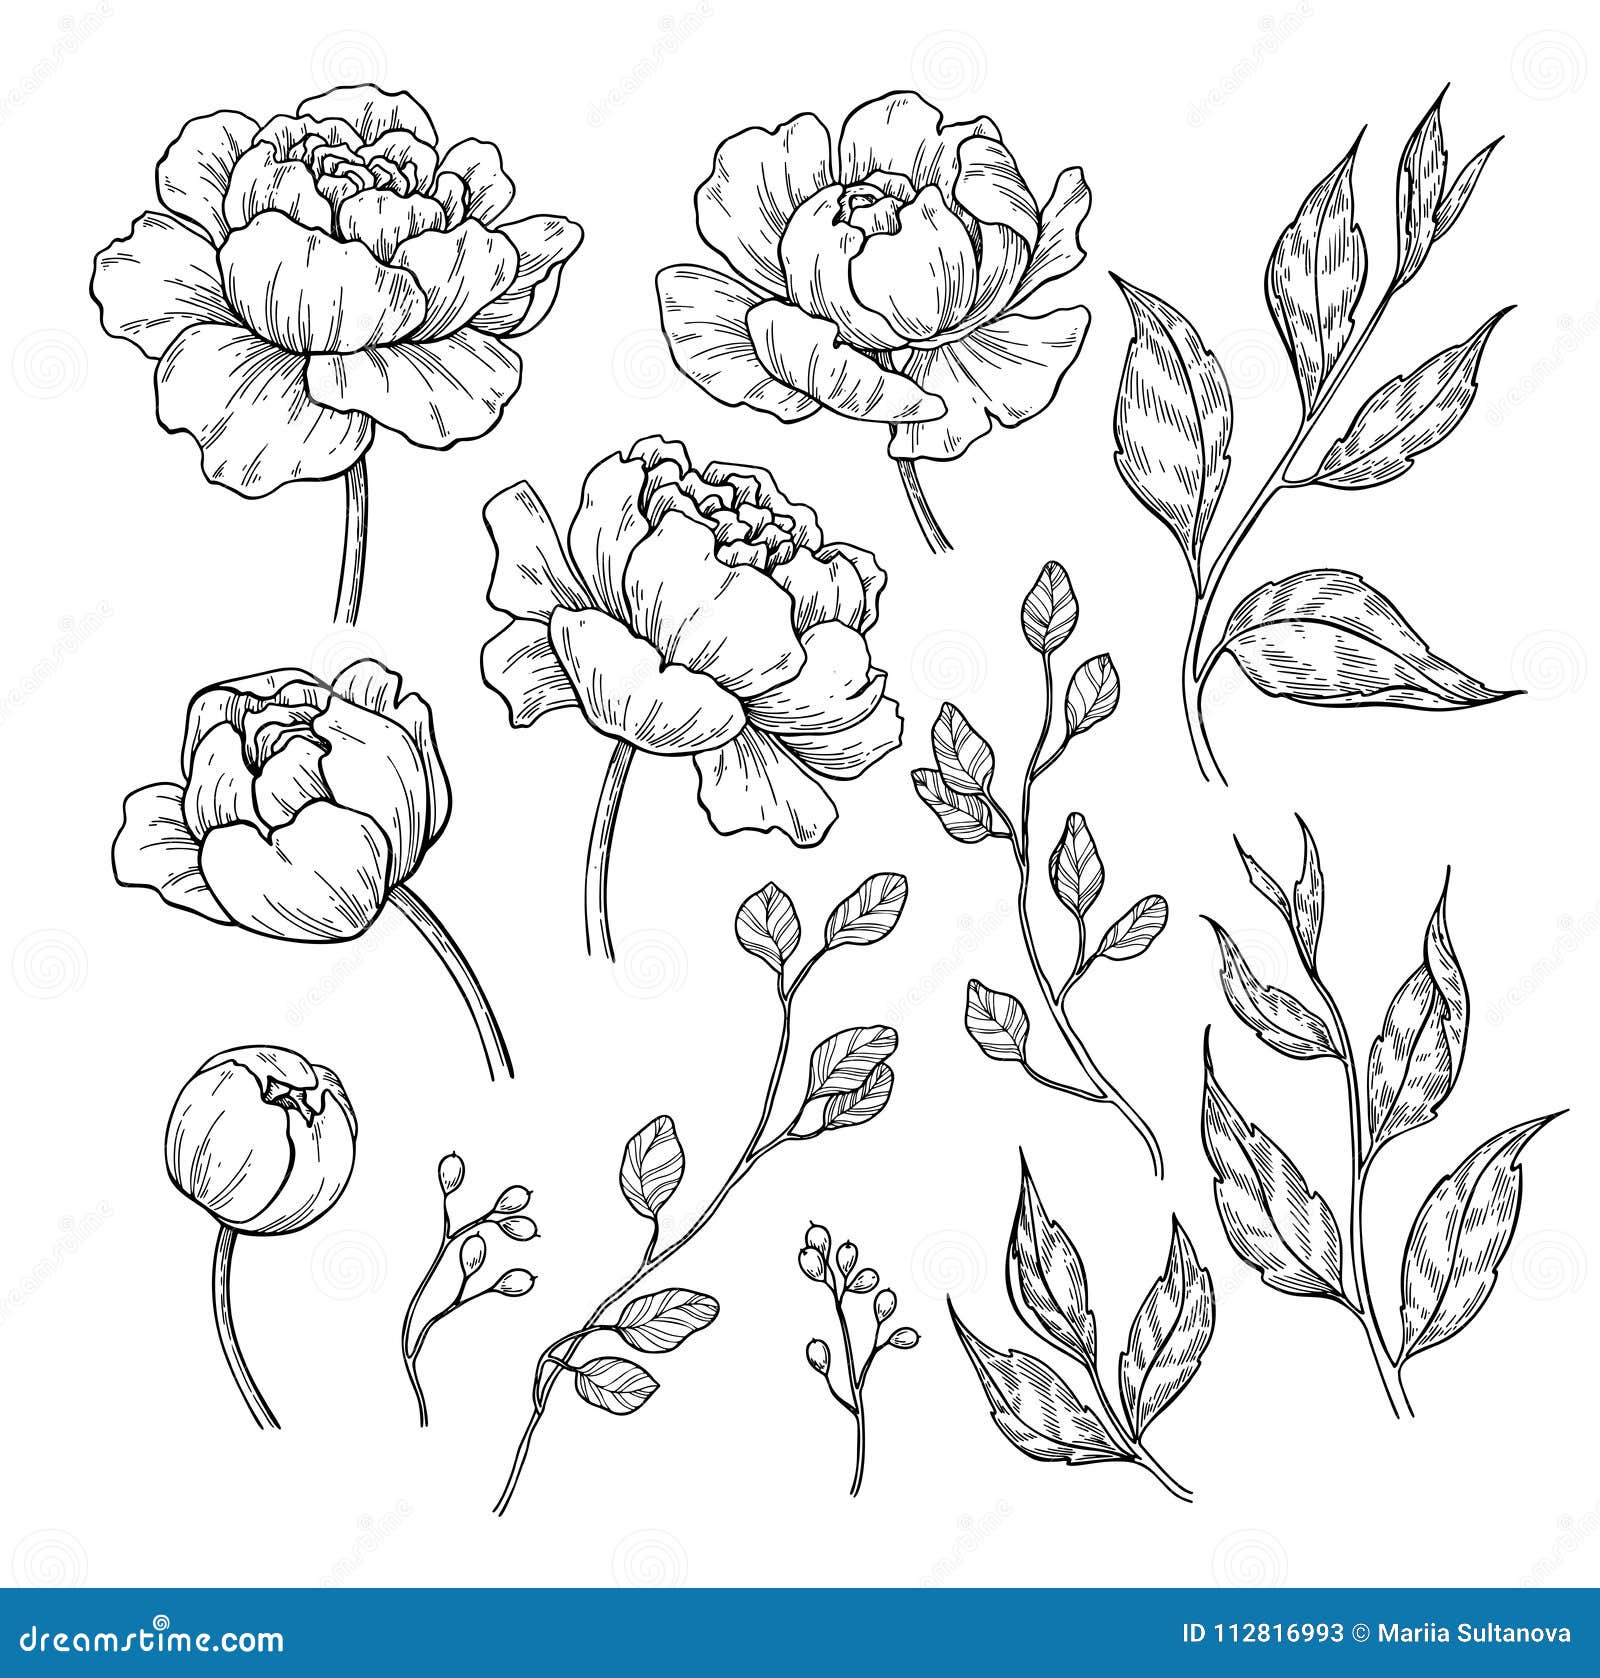 Flower Drawing Vectors  Free Illustrations Drawings PNG Clip Art   Backgrounds Images  rawpixel